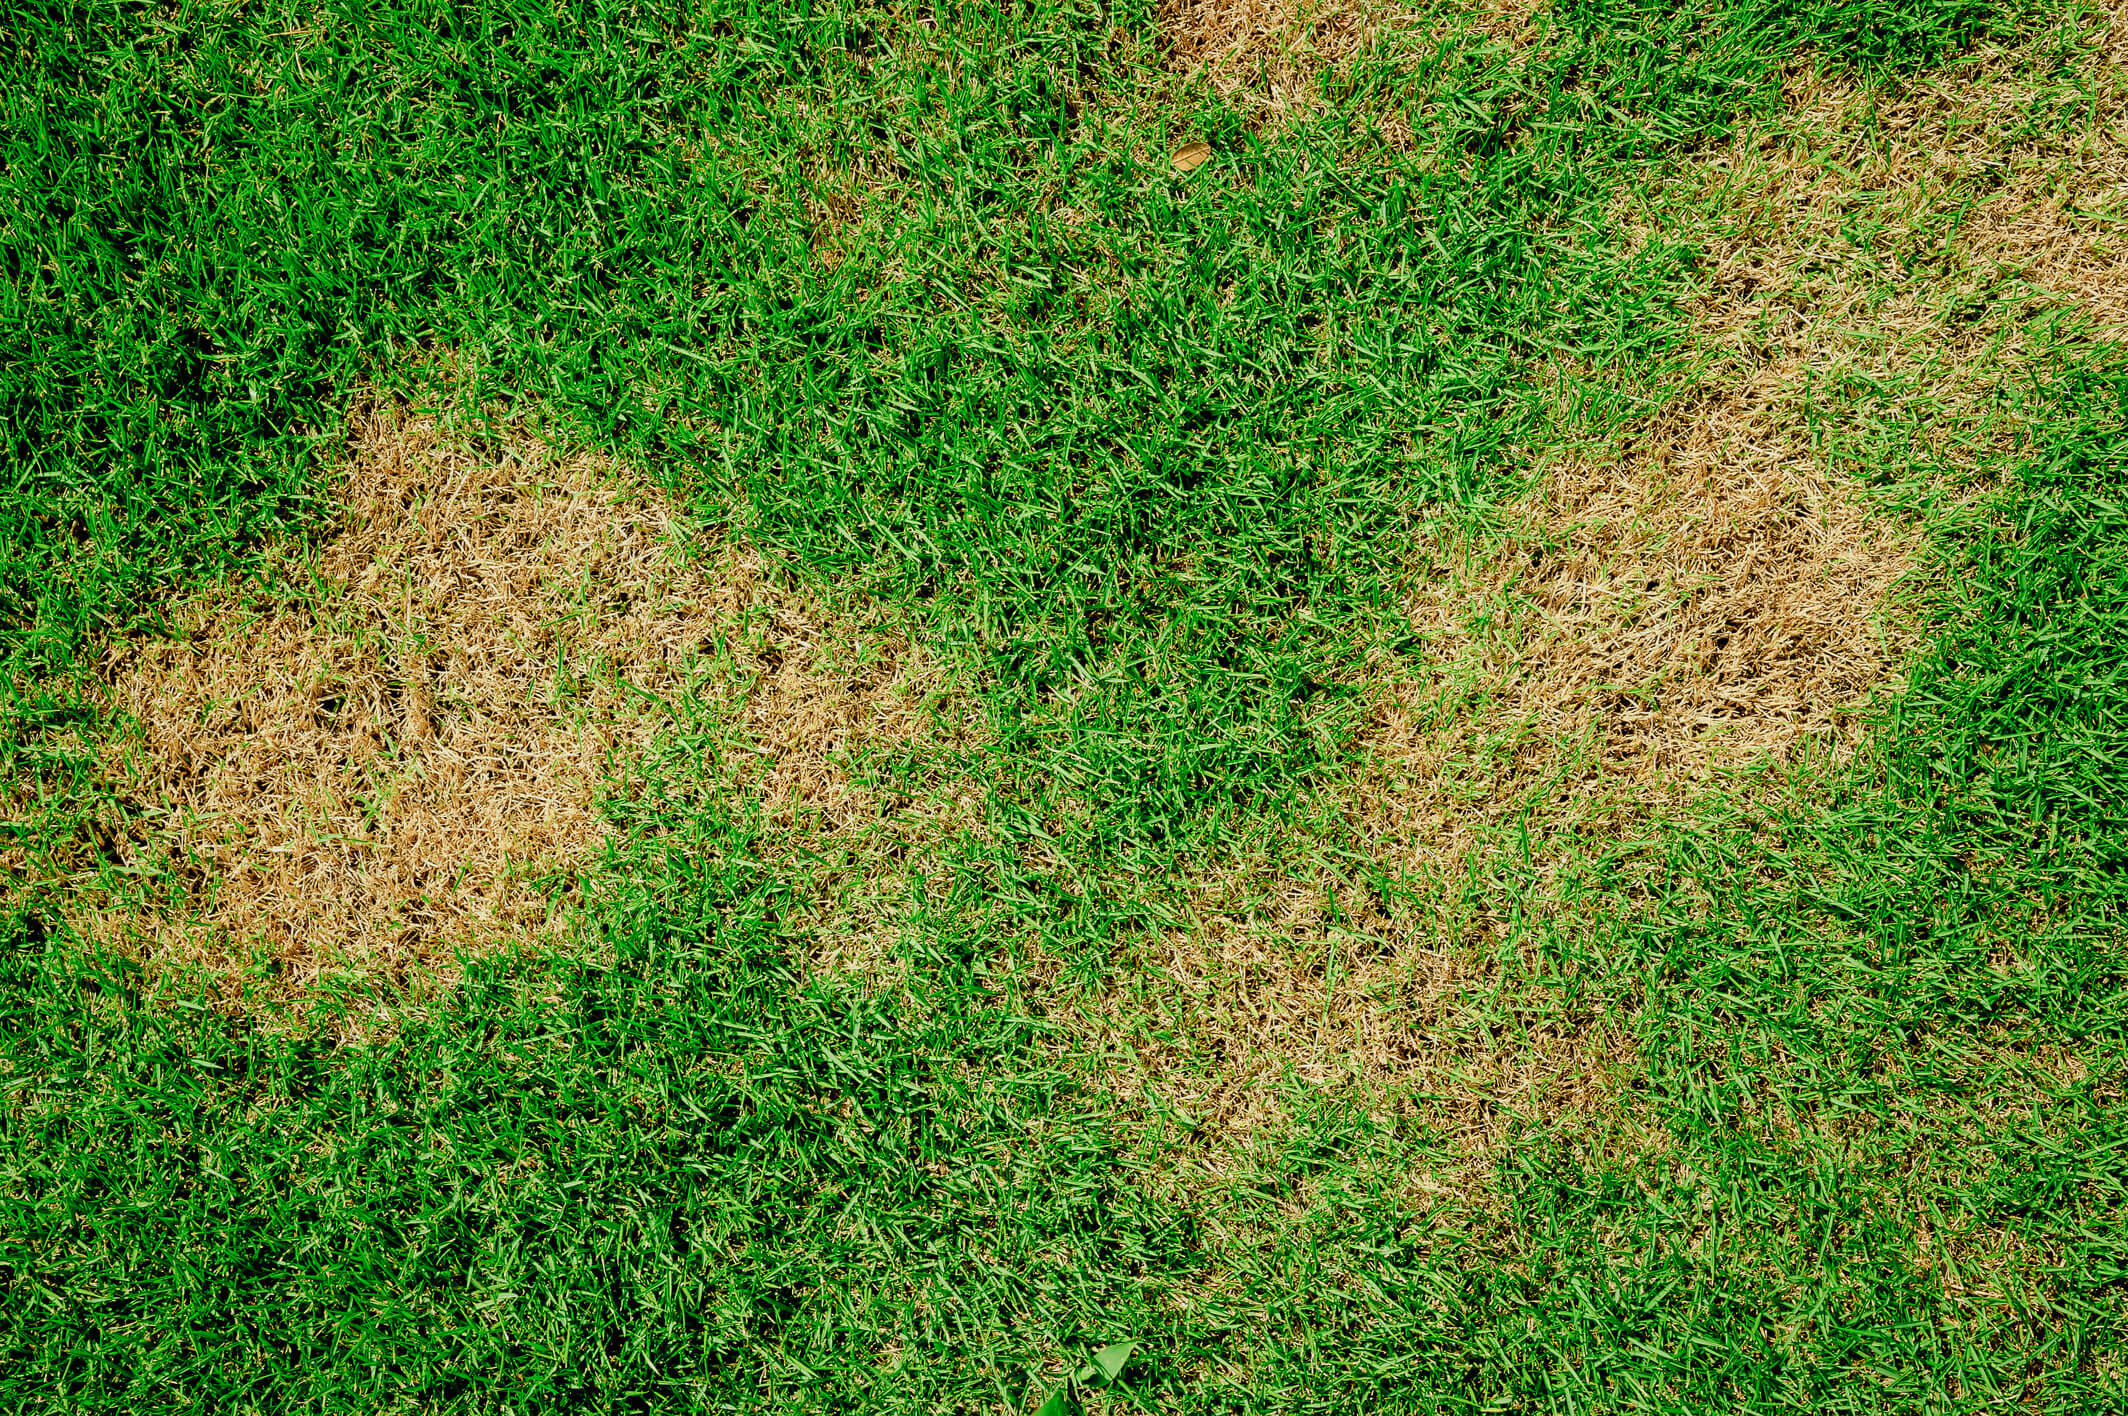 Dry brown patches on grass.